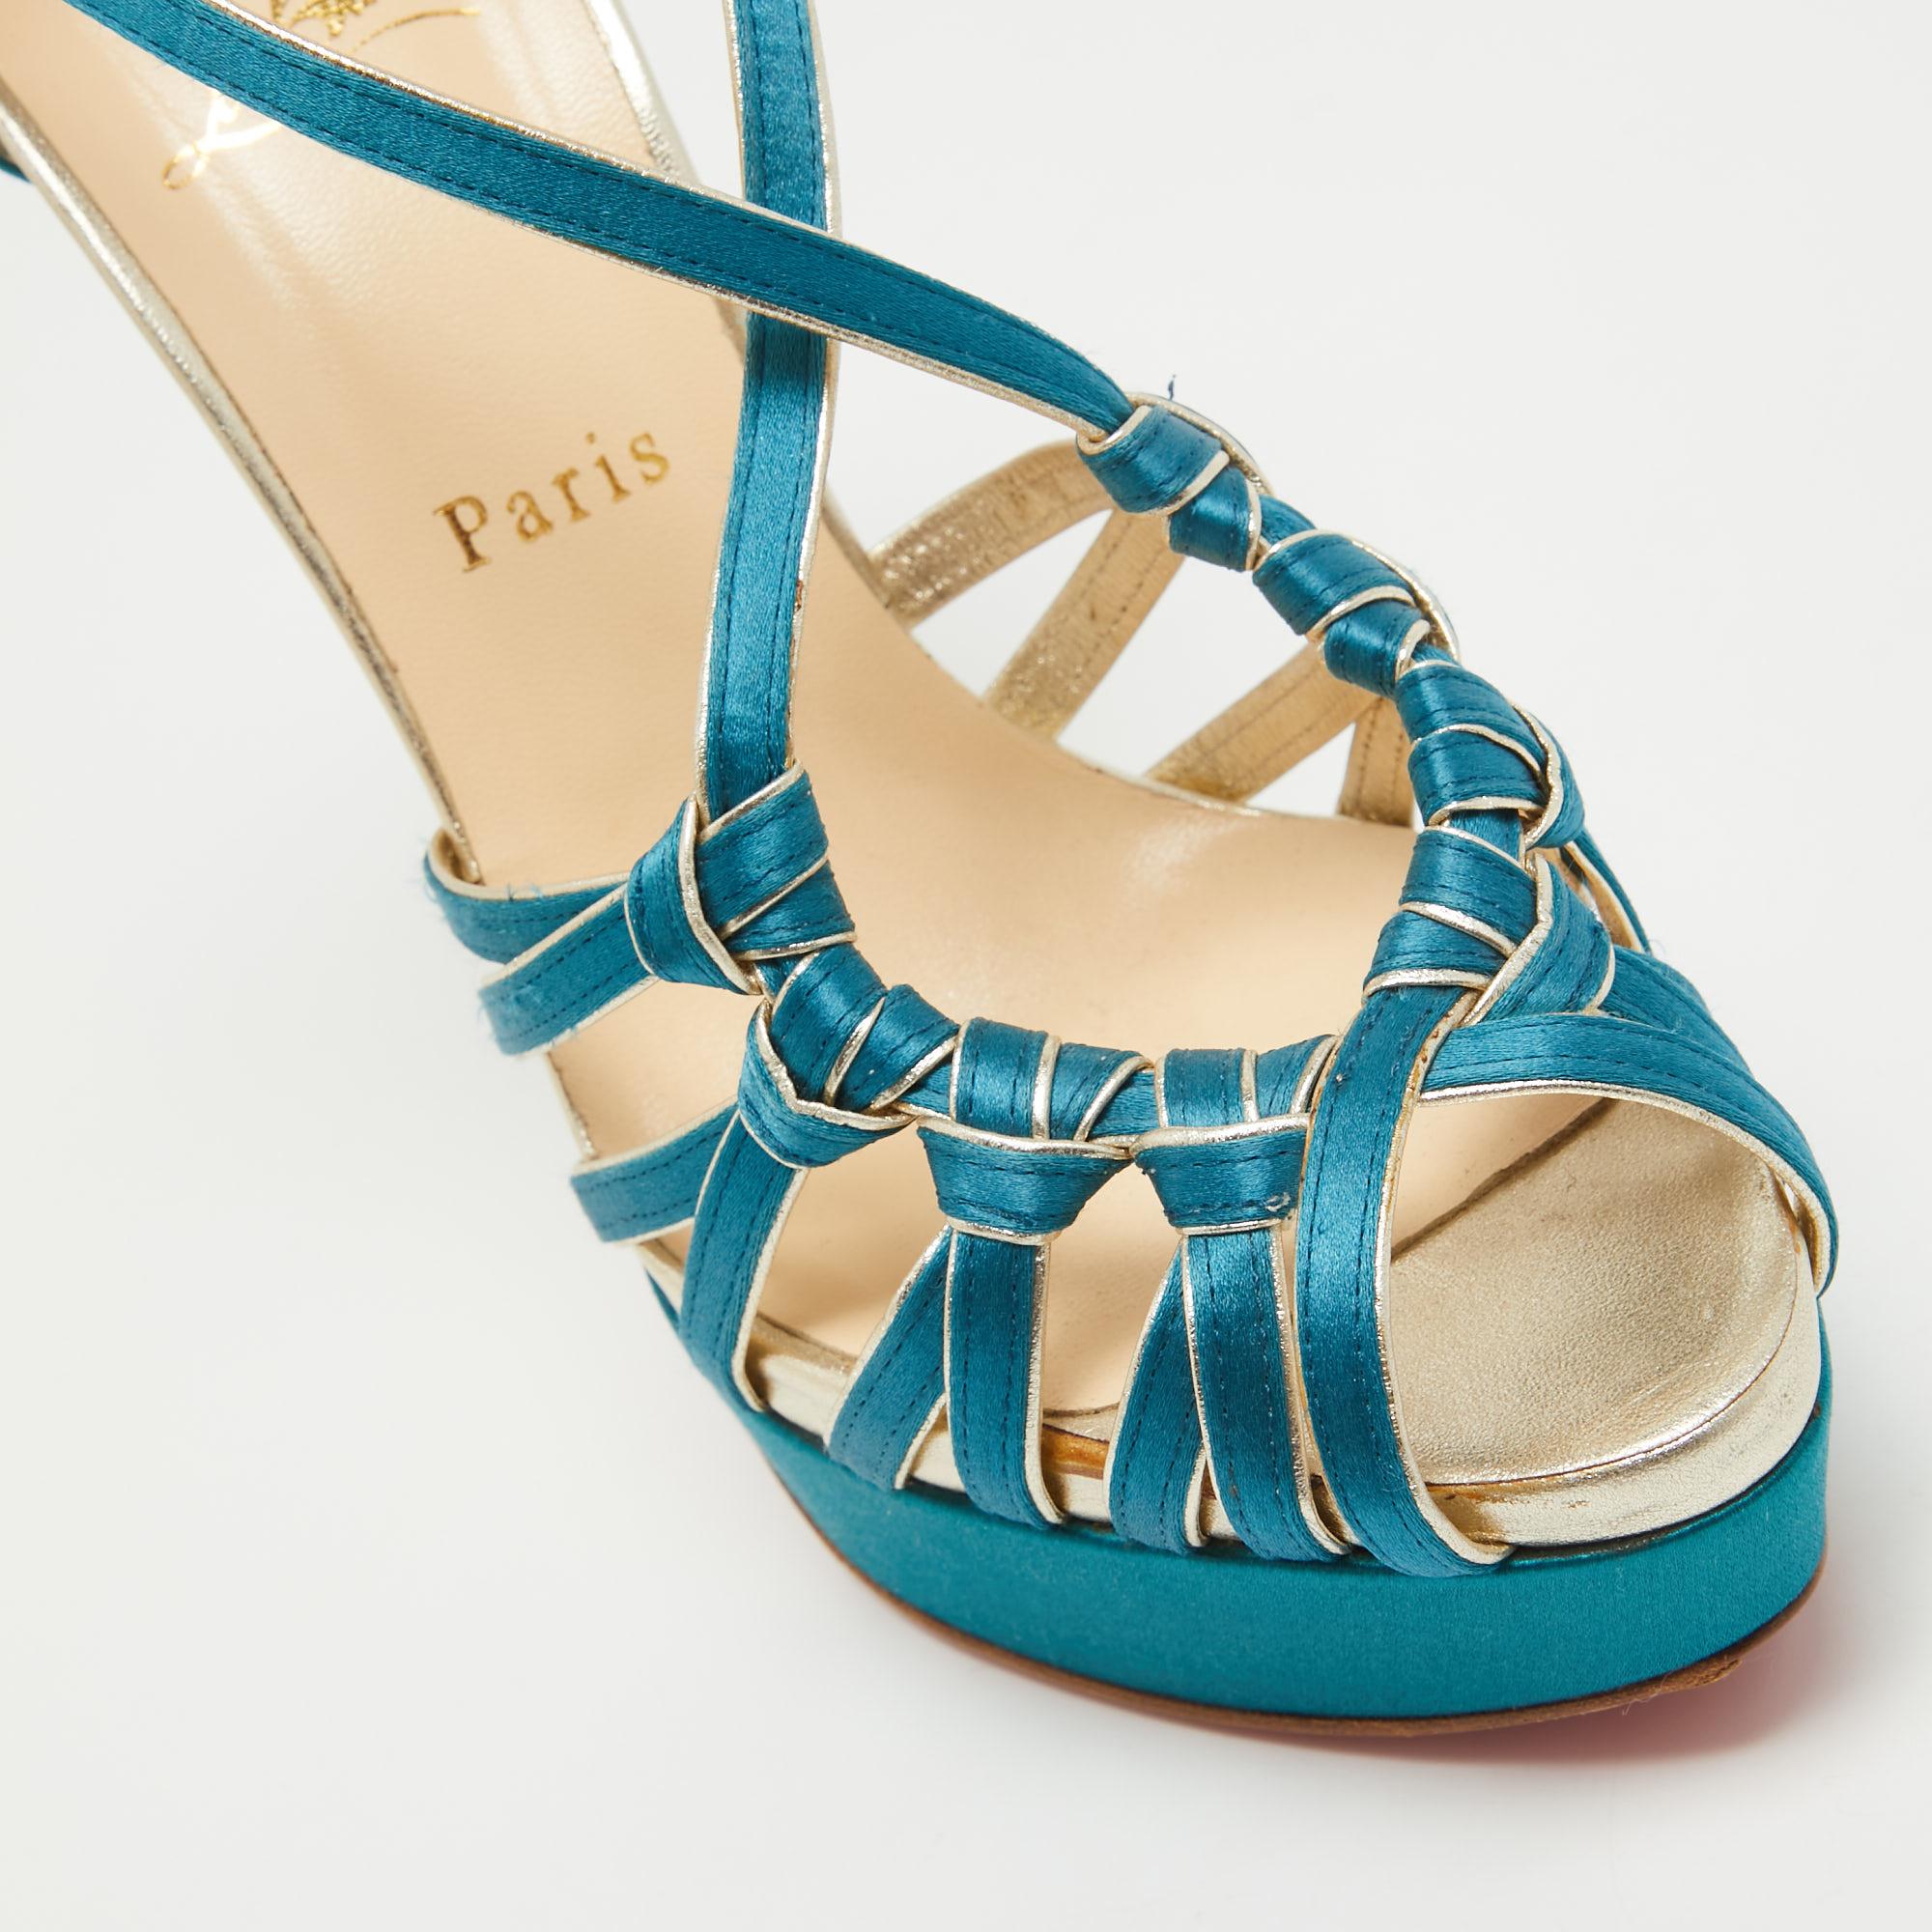 Christian Louboutin Teal Satin Knotted Strappy Platform Sandals Size 39 For Sale 3